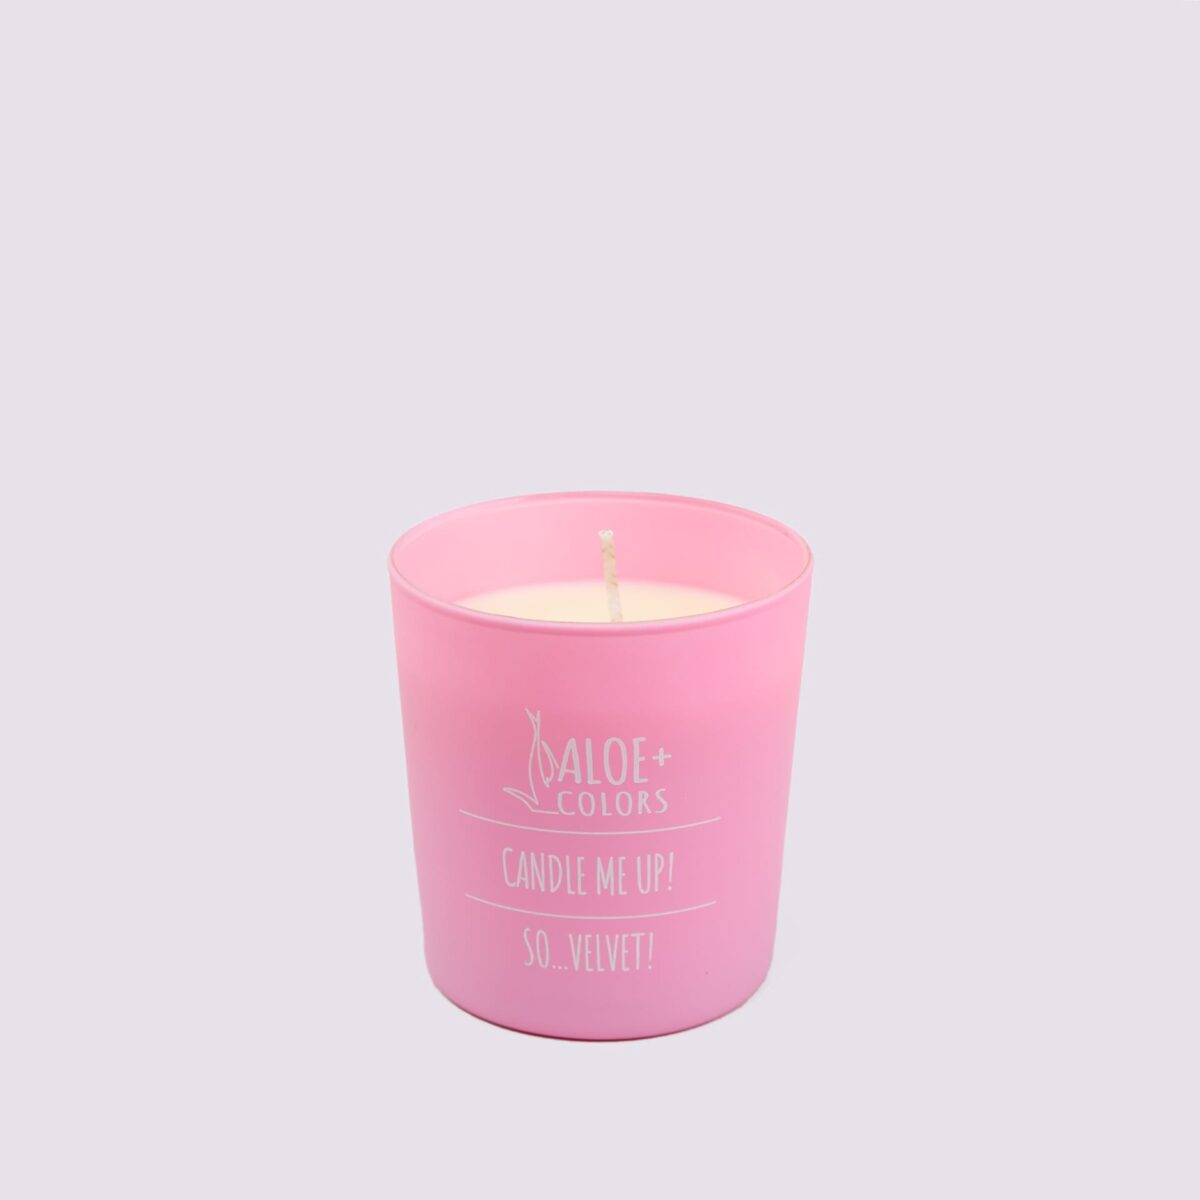 aloe-colors-scented-soy-candle-so-velvet-mamaspharmacy-2